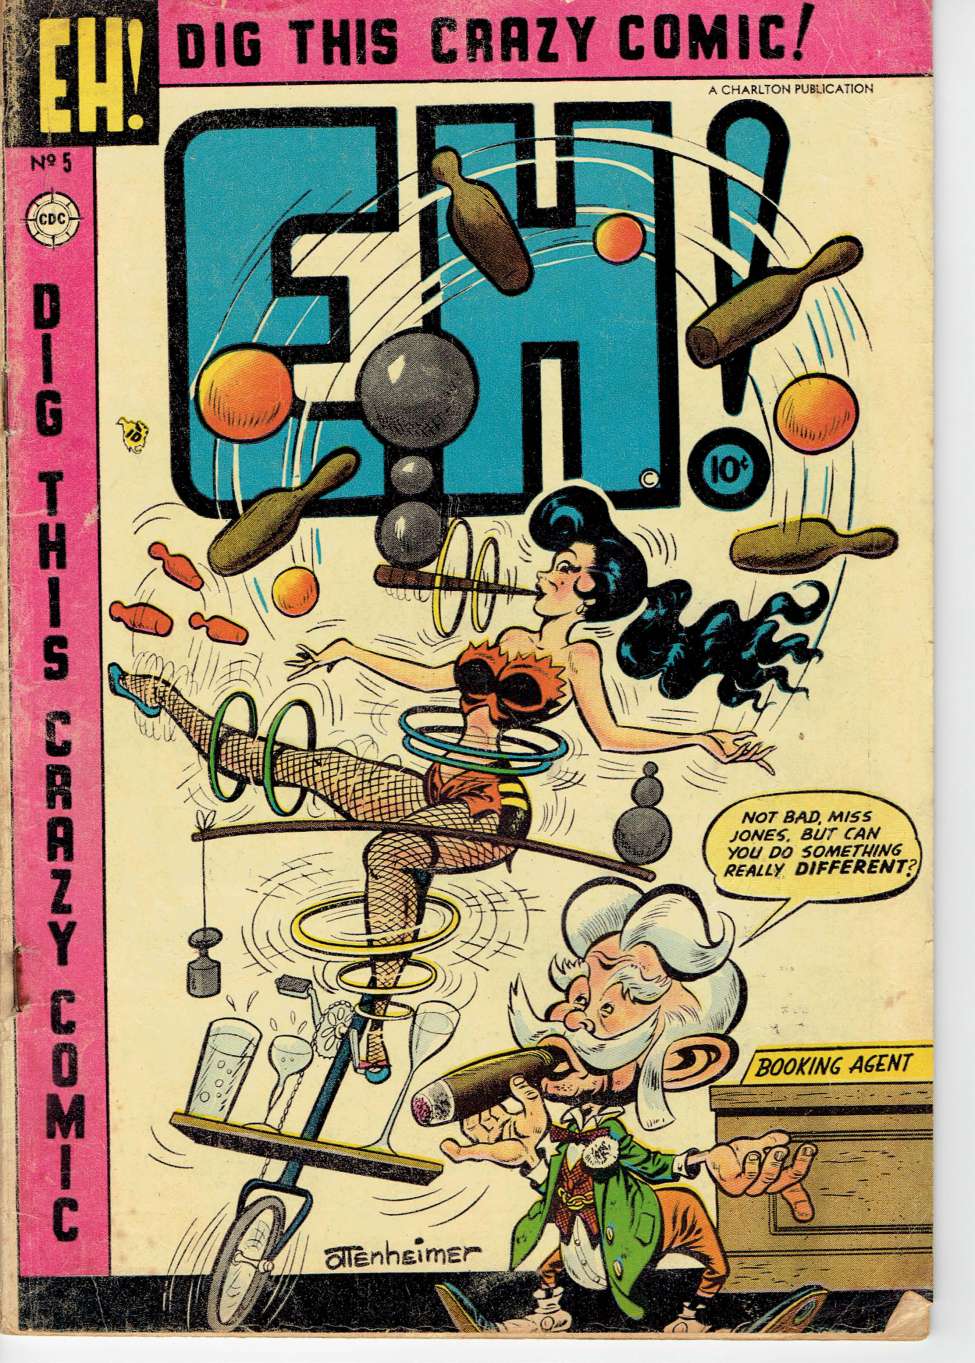 Comic Book Cover For Eh! 5